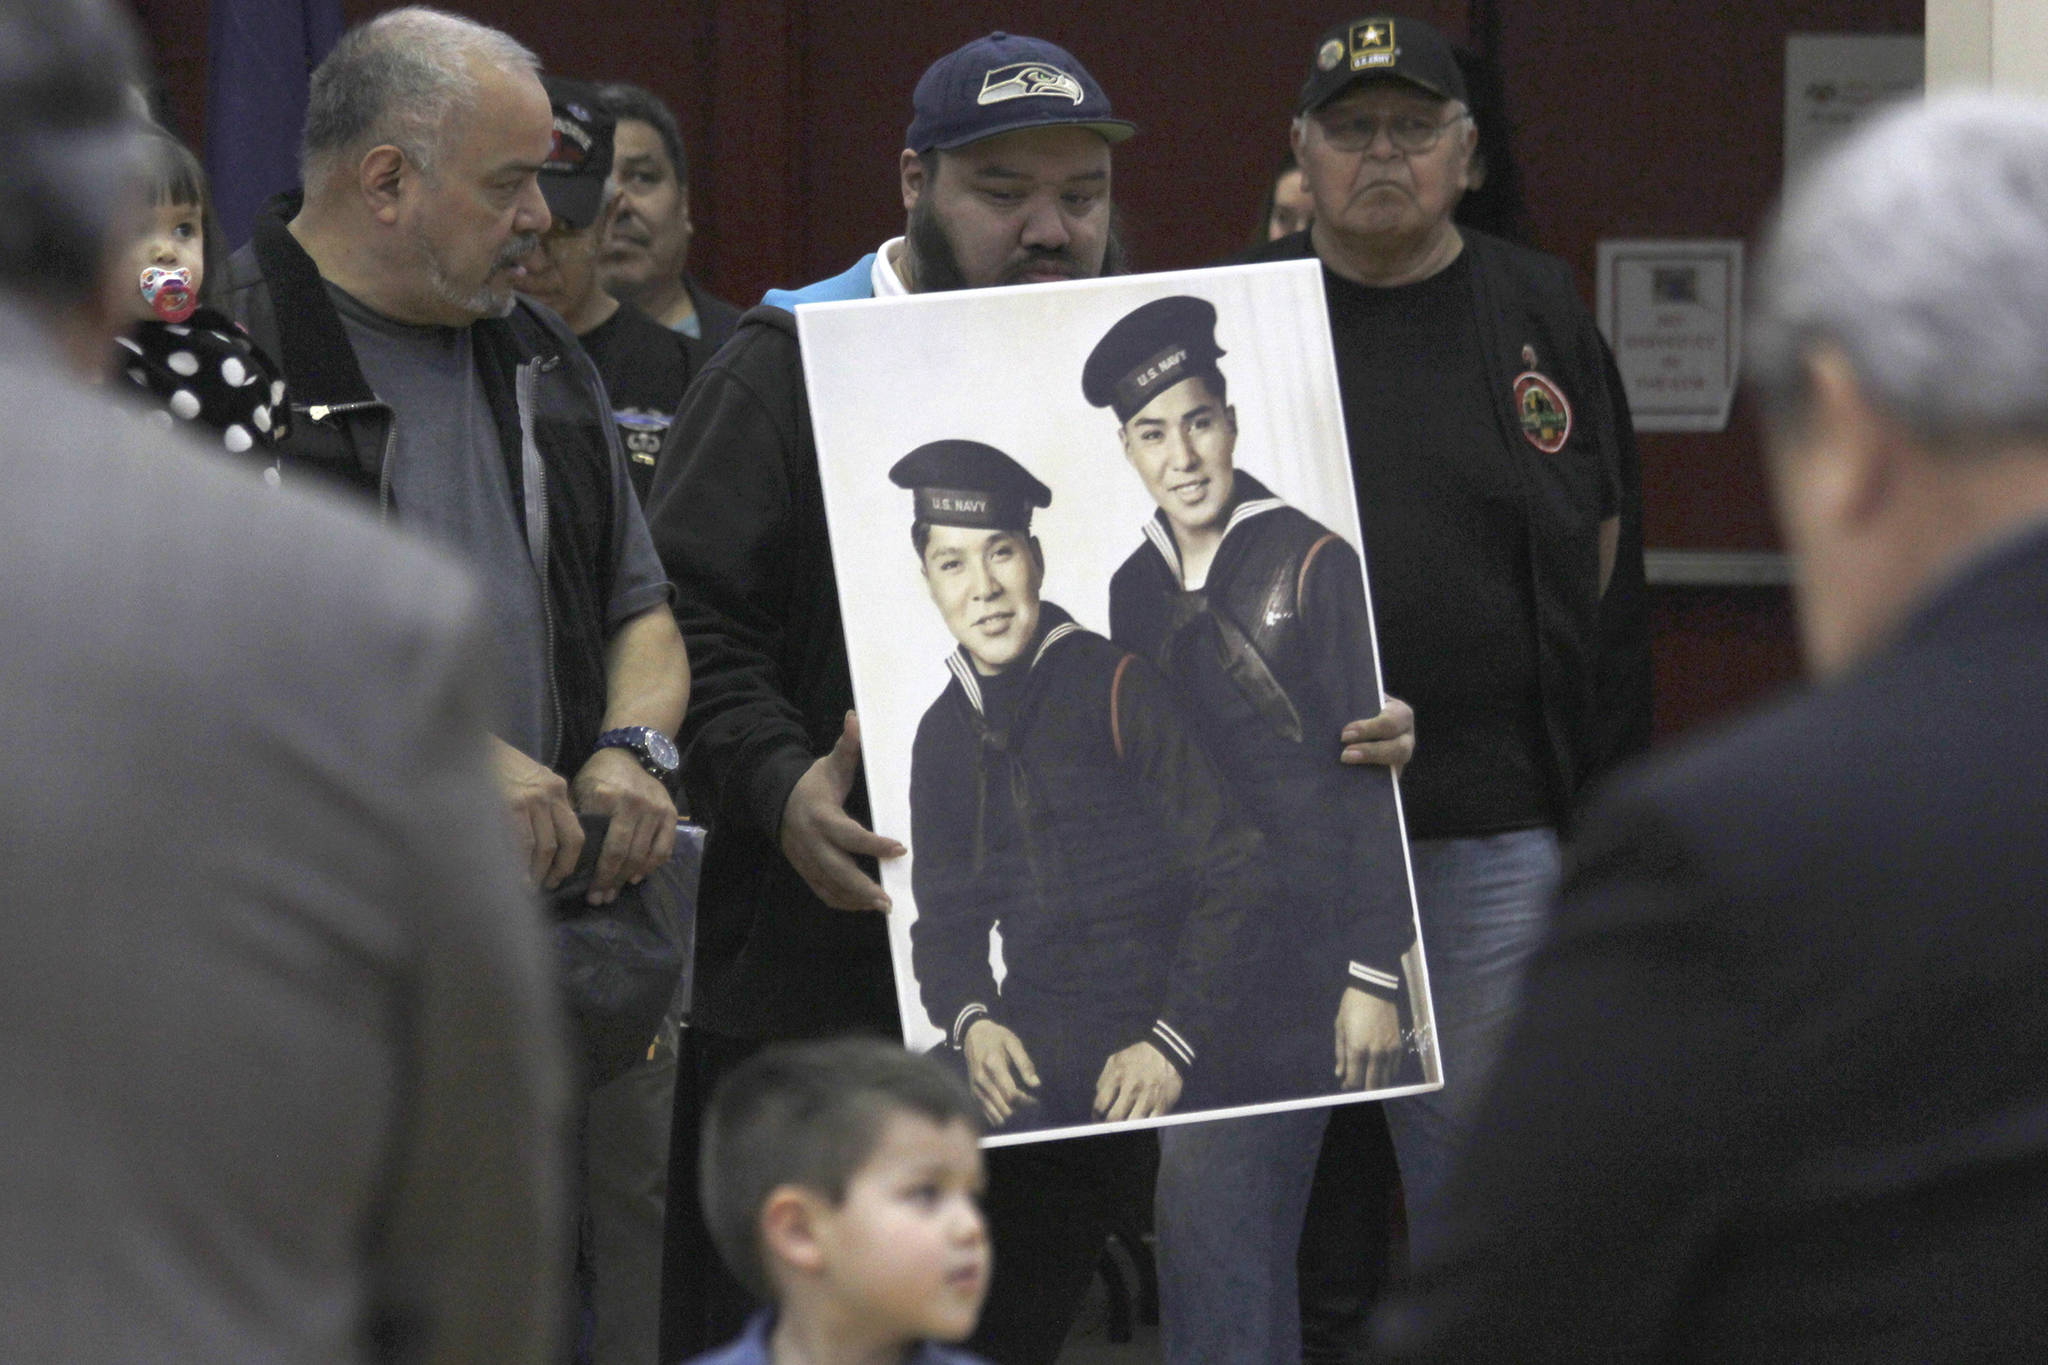 Family members of Mark and Harvey Jacobs hold a picture of the brothers during a ceremony honoring Tlingit code talkers on Monday, March 18, 2019. (Alex McCarthy | Juneau Empire)